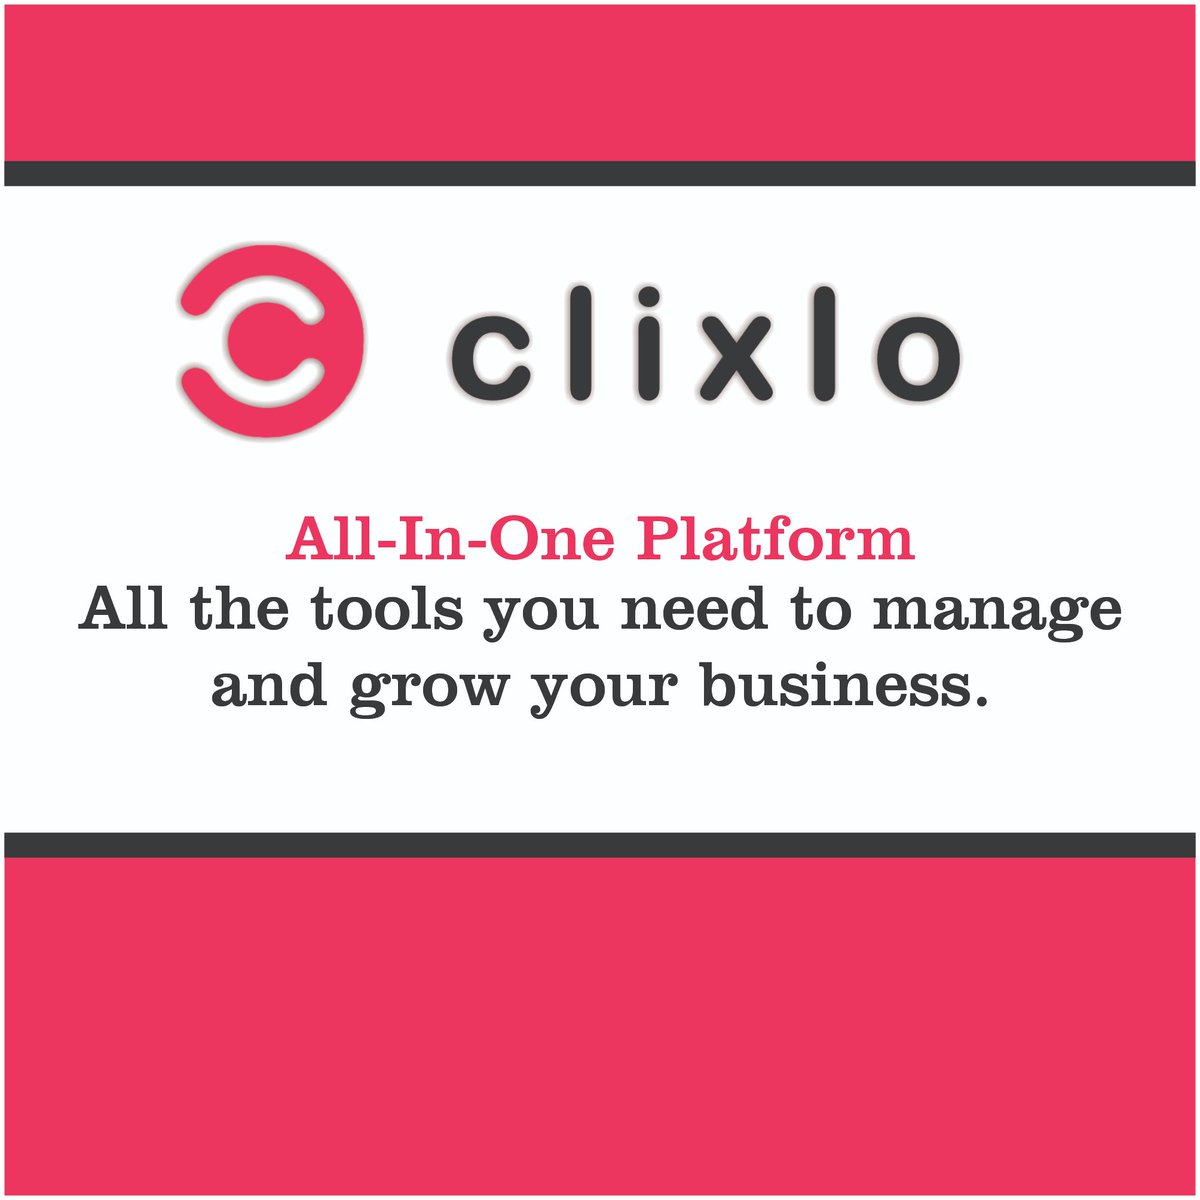 Reach out now for your Clixlo Projects now!

#smallbusinessowner #smallbizowner #smallbusinesstips #entrepreneur #entrepreneurship #entrepreneurlife #entrepreneurs #entrepreneurlifestyle #entrepreneurmindset #entrepreneurial #entrepreneurquotes #entrepreneursofinstagram